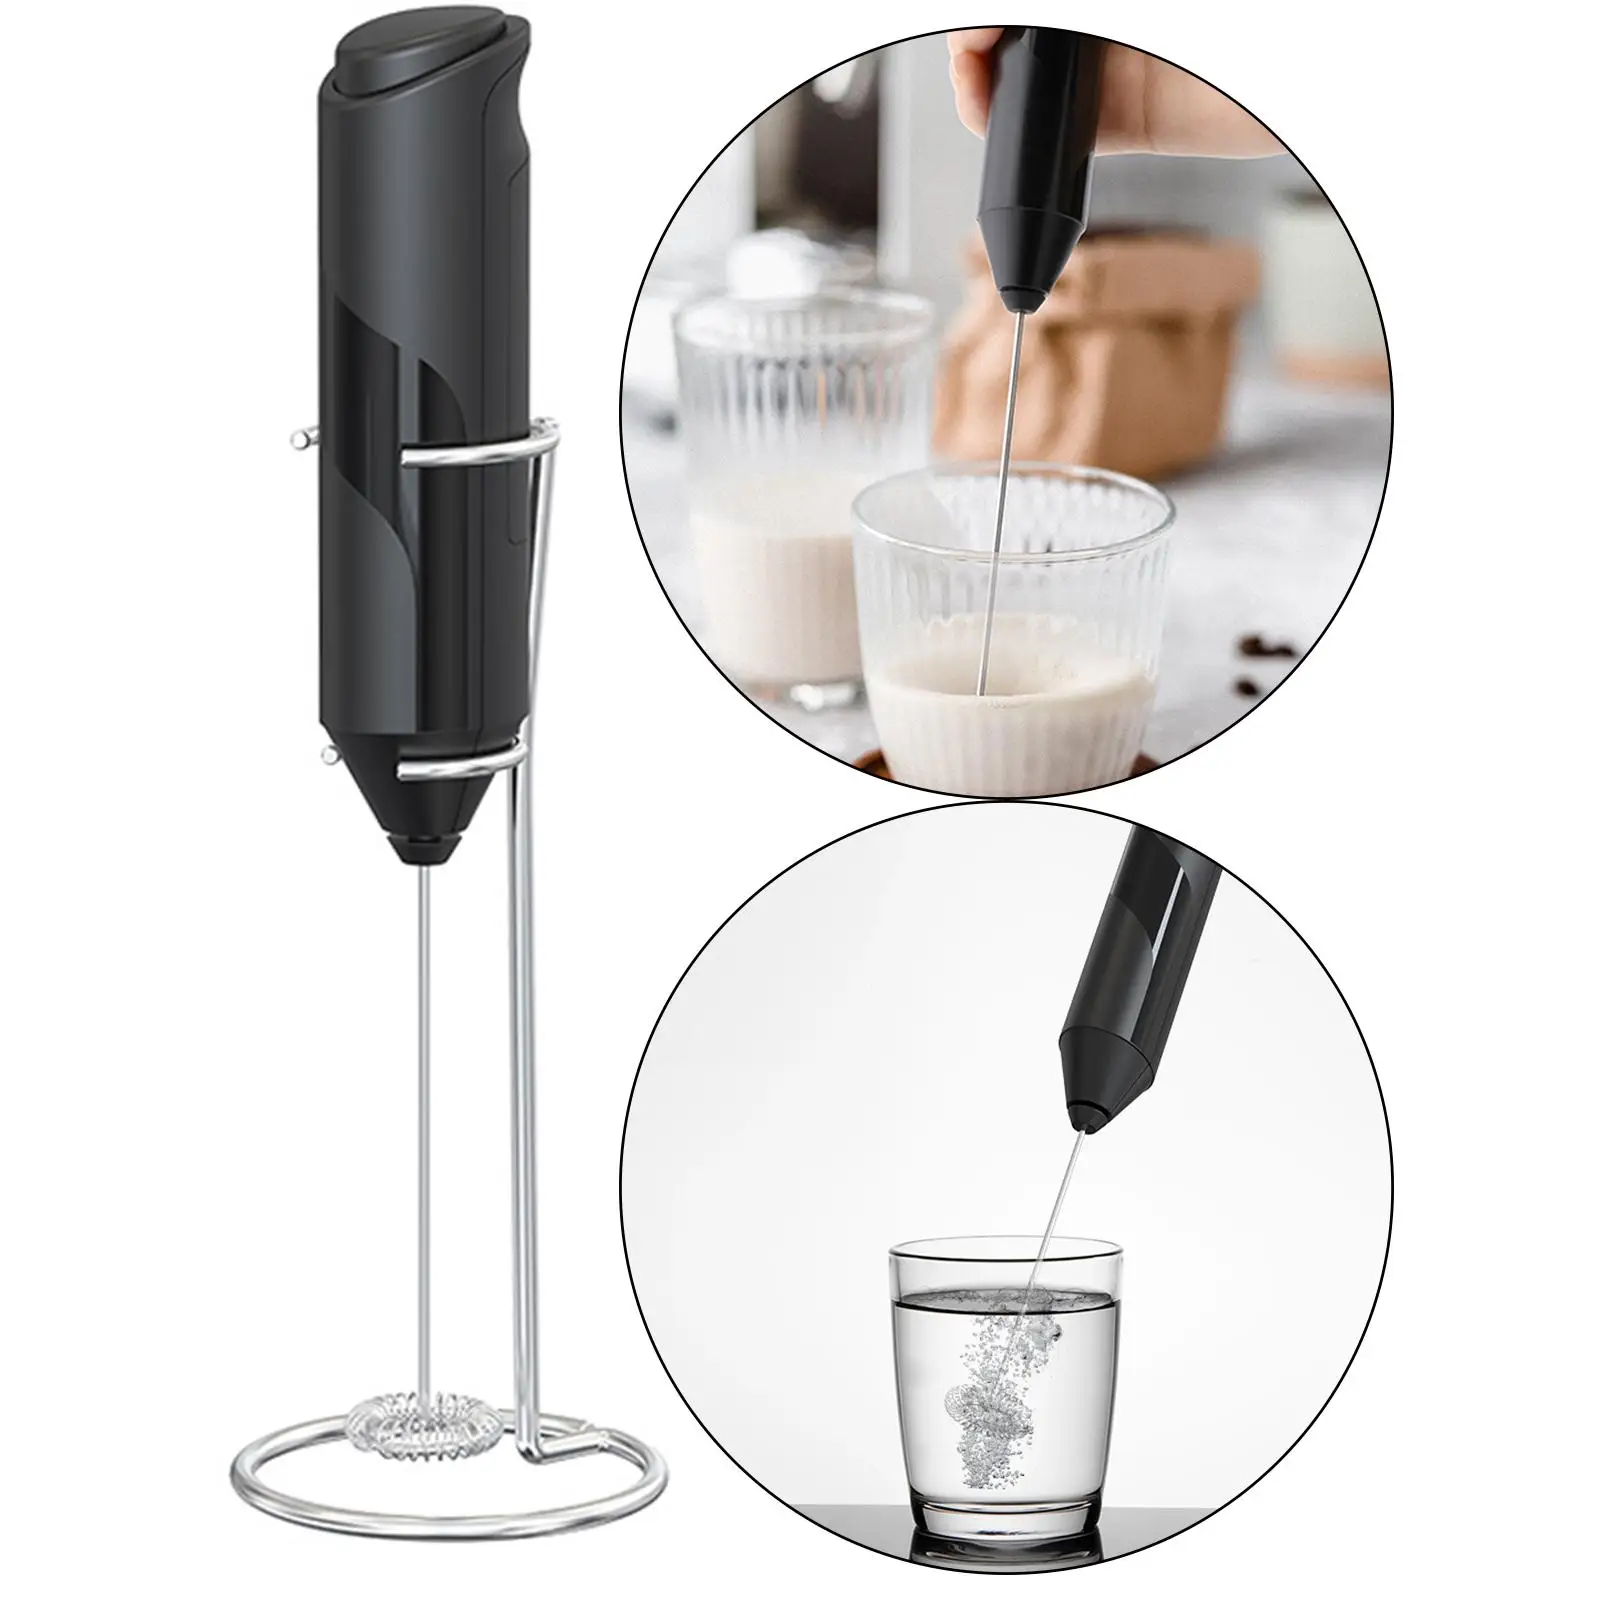 Handheld Electric Frother Mixer Blender Coffee Frother Foam Maker Egg Beater for Cream Hot Chocolate Cappuccino Matcha Coffee